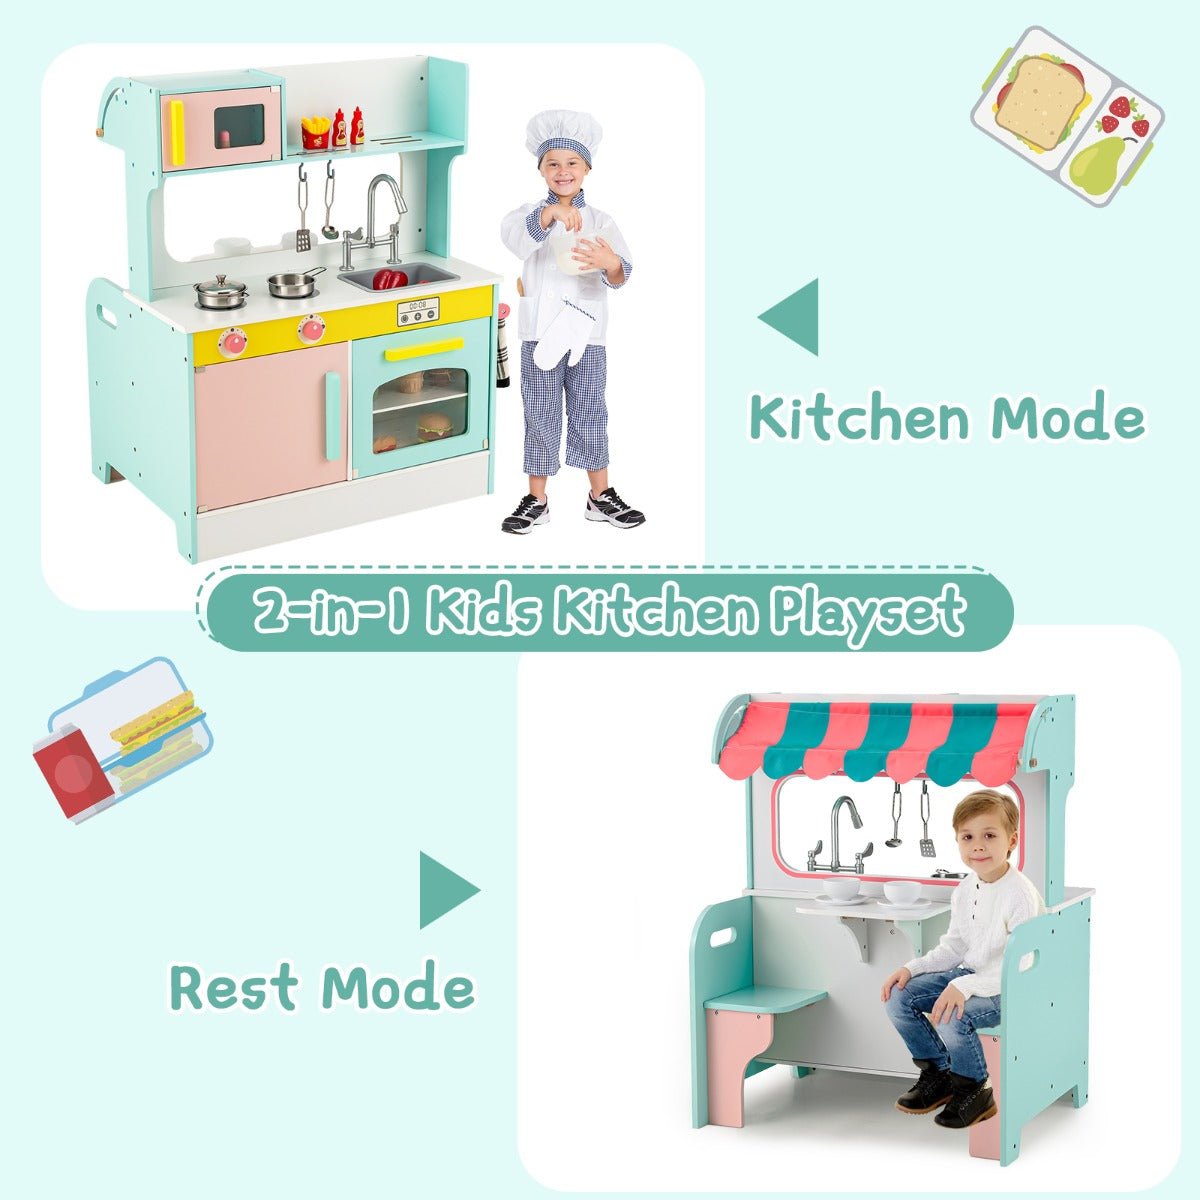 Educational Fun: 2-in-1 Cooking Toy with Realistic Faucet for Kids